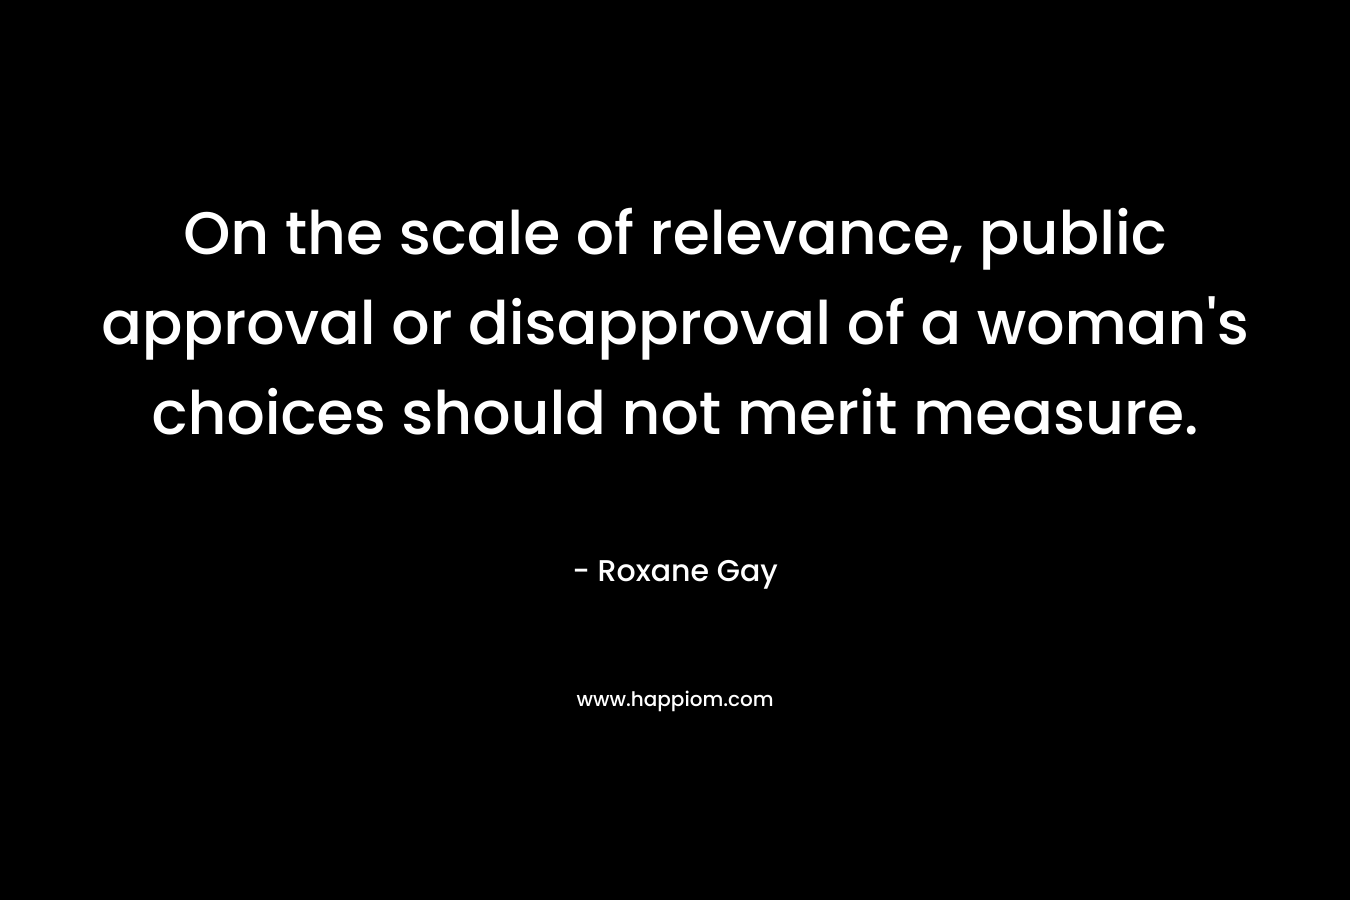 On the scale of relevance, public approval or disapproval of a woman’s choices should not merit measure. – Roxane Gay